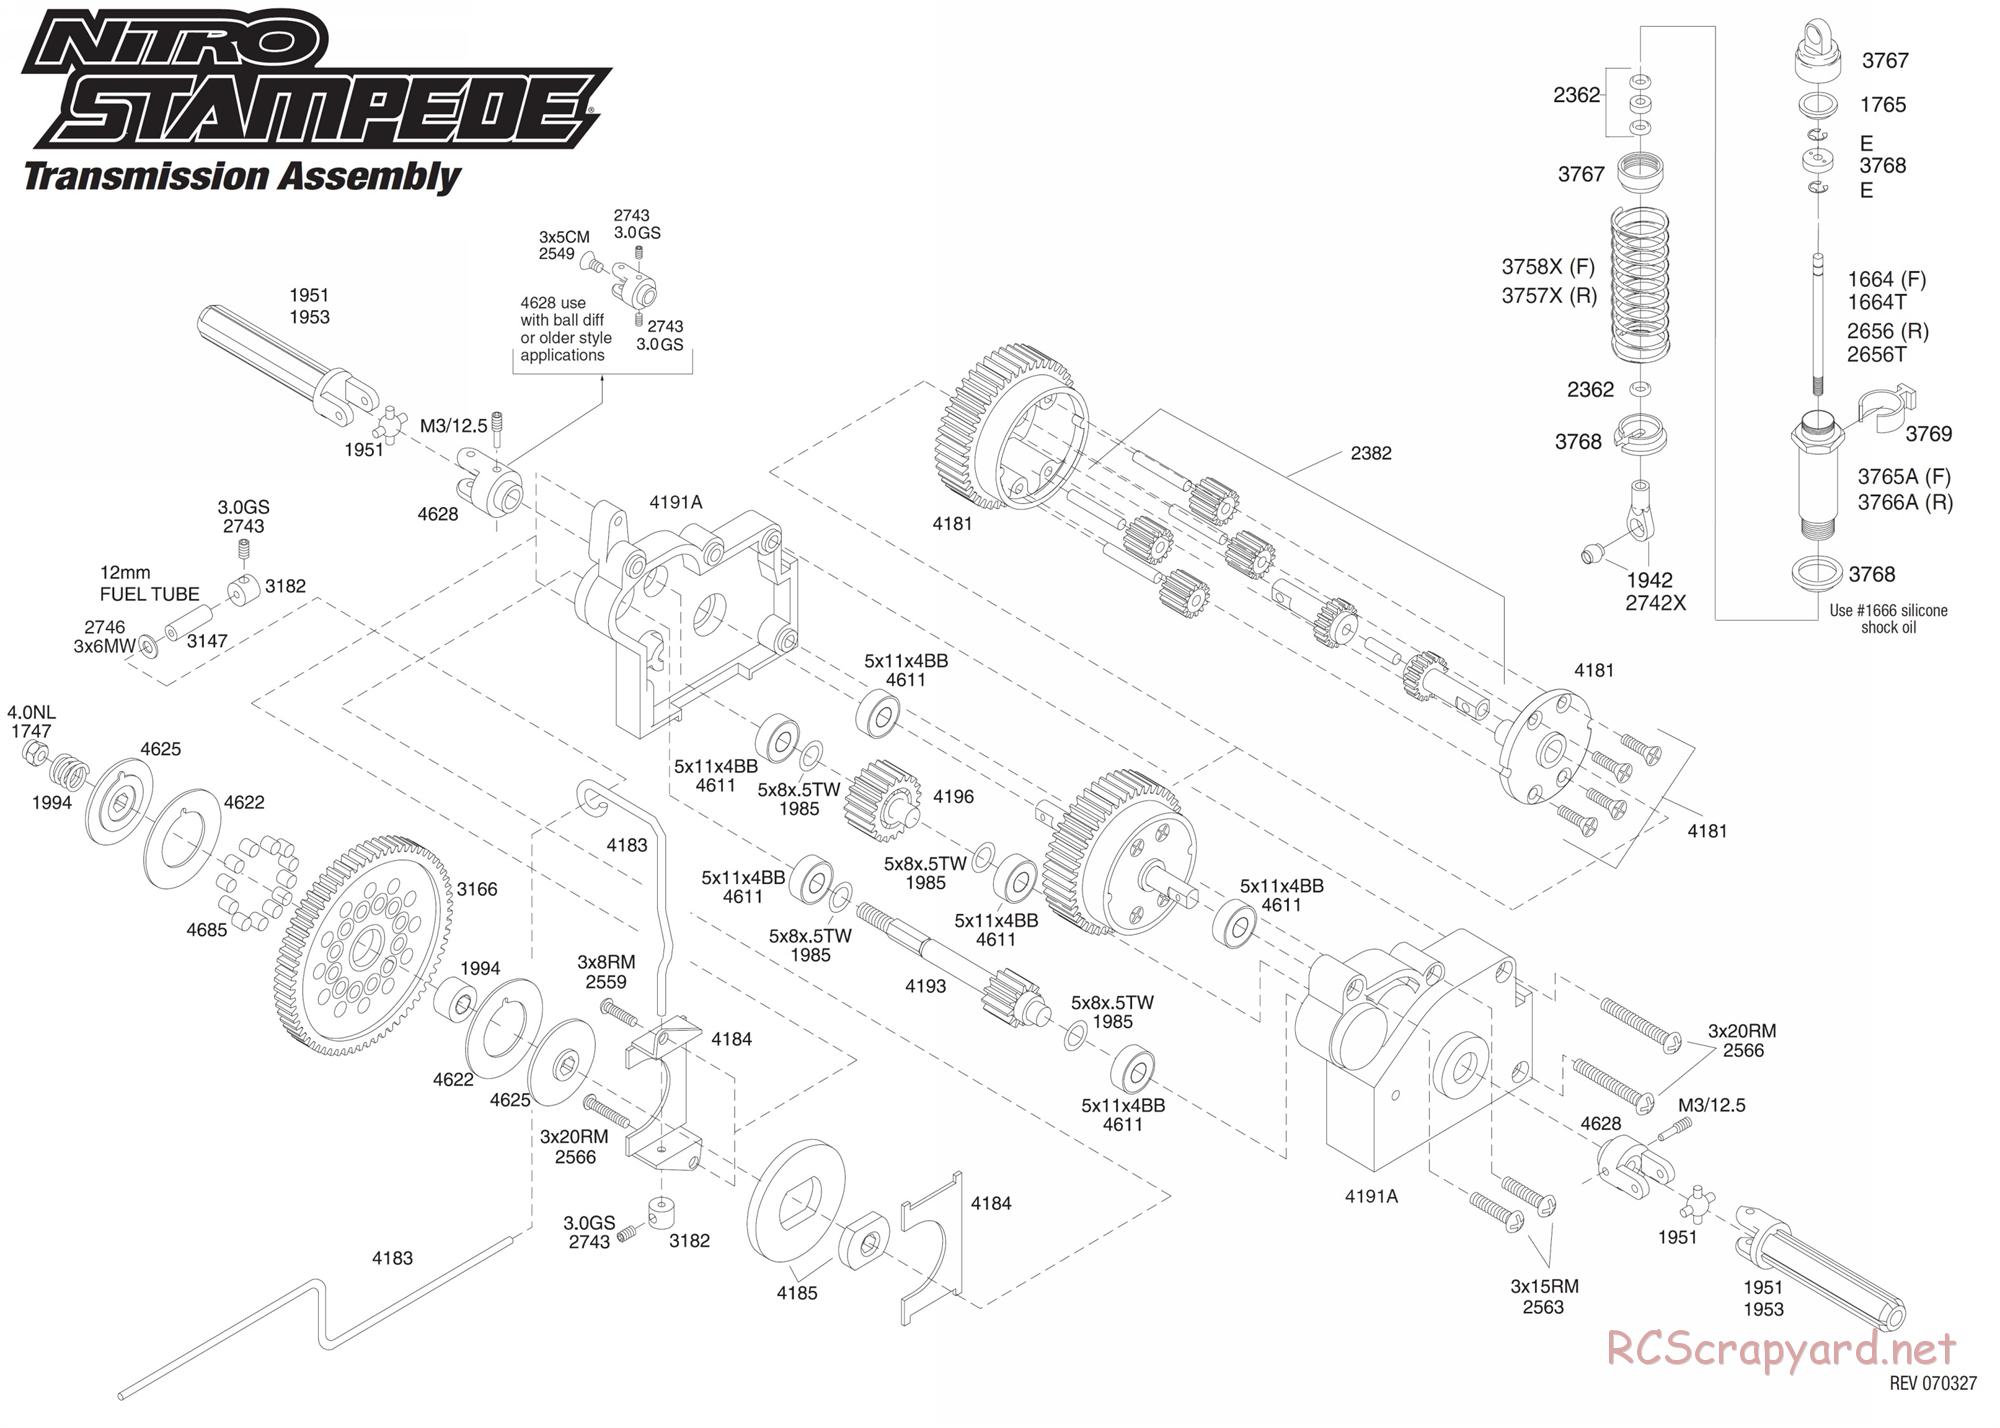 Traxxas - Nitro Stampede (2007) - Exploded Views - Page 4